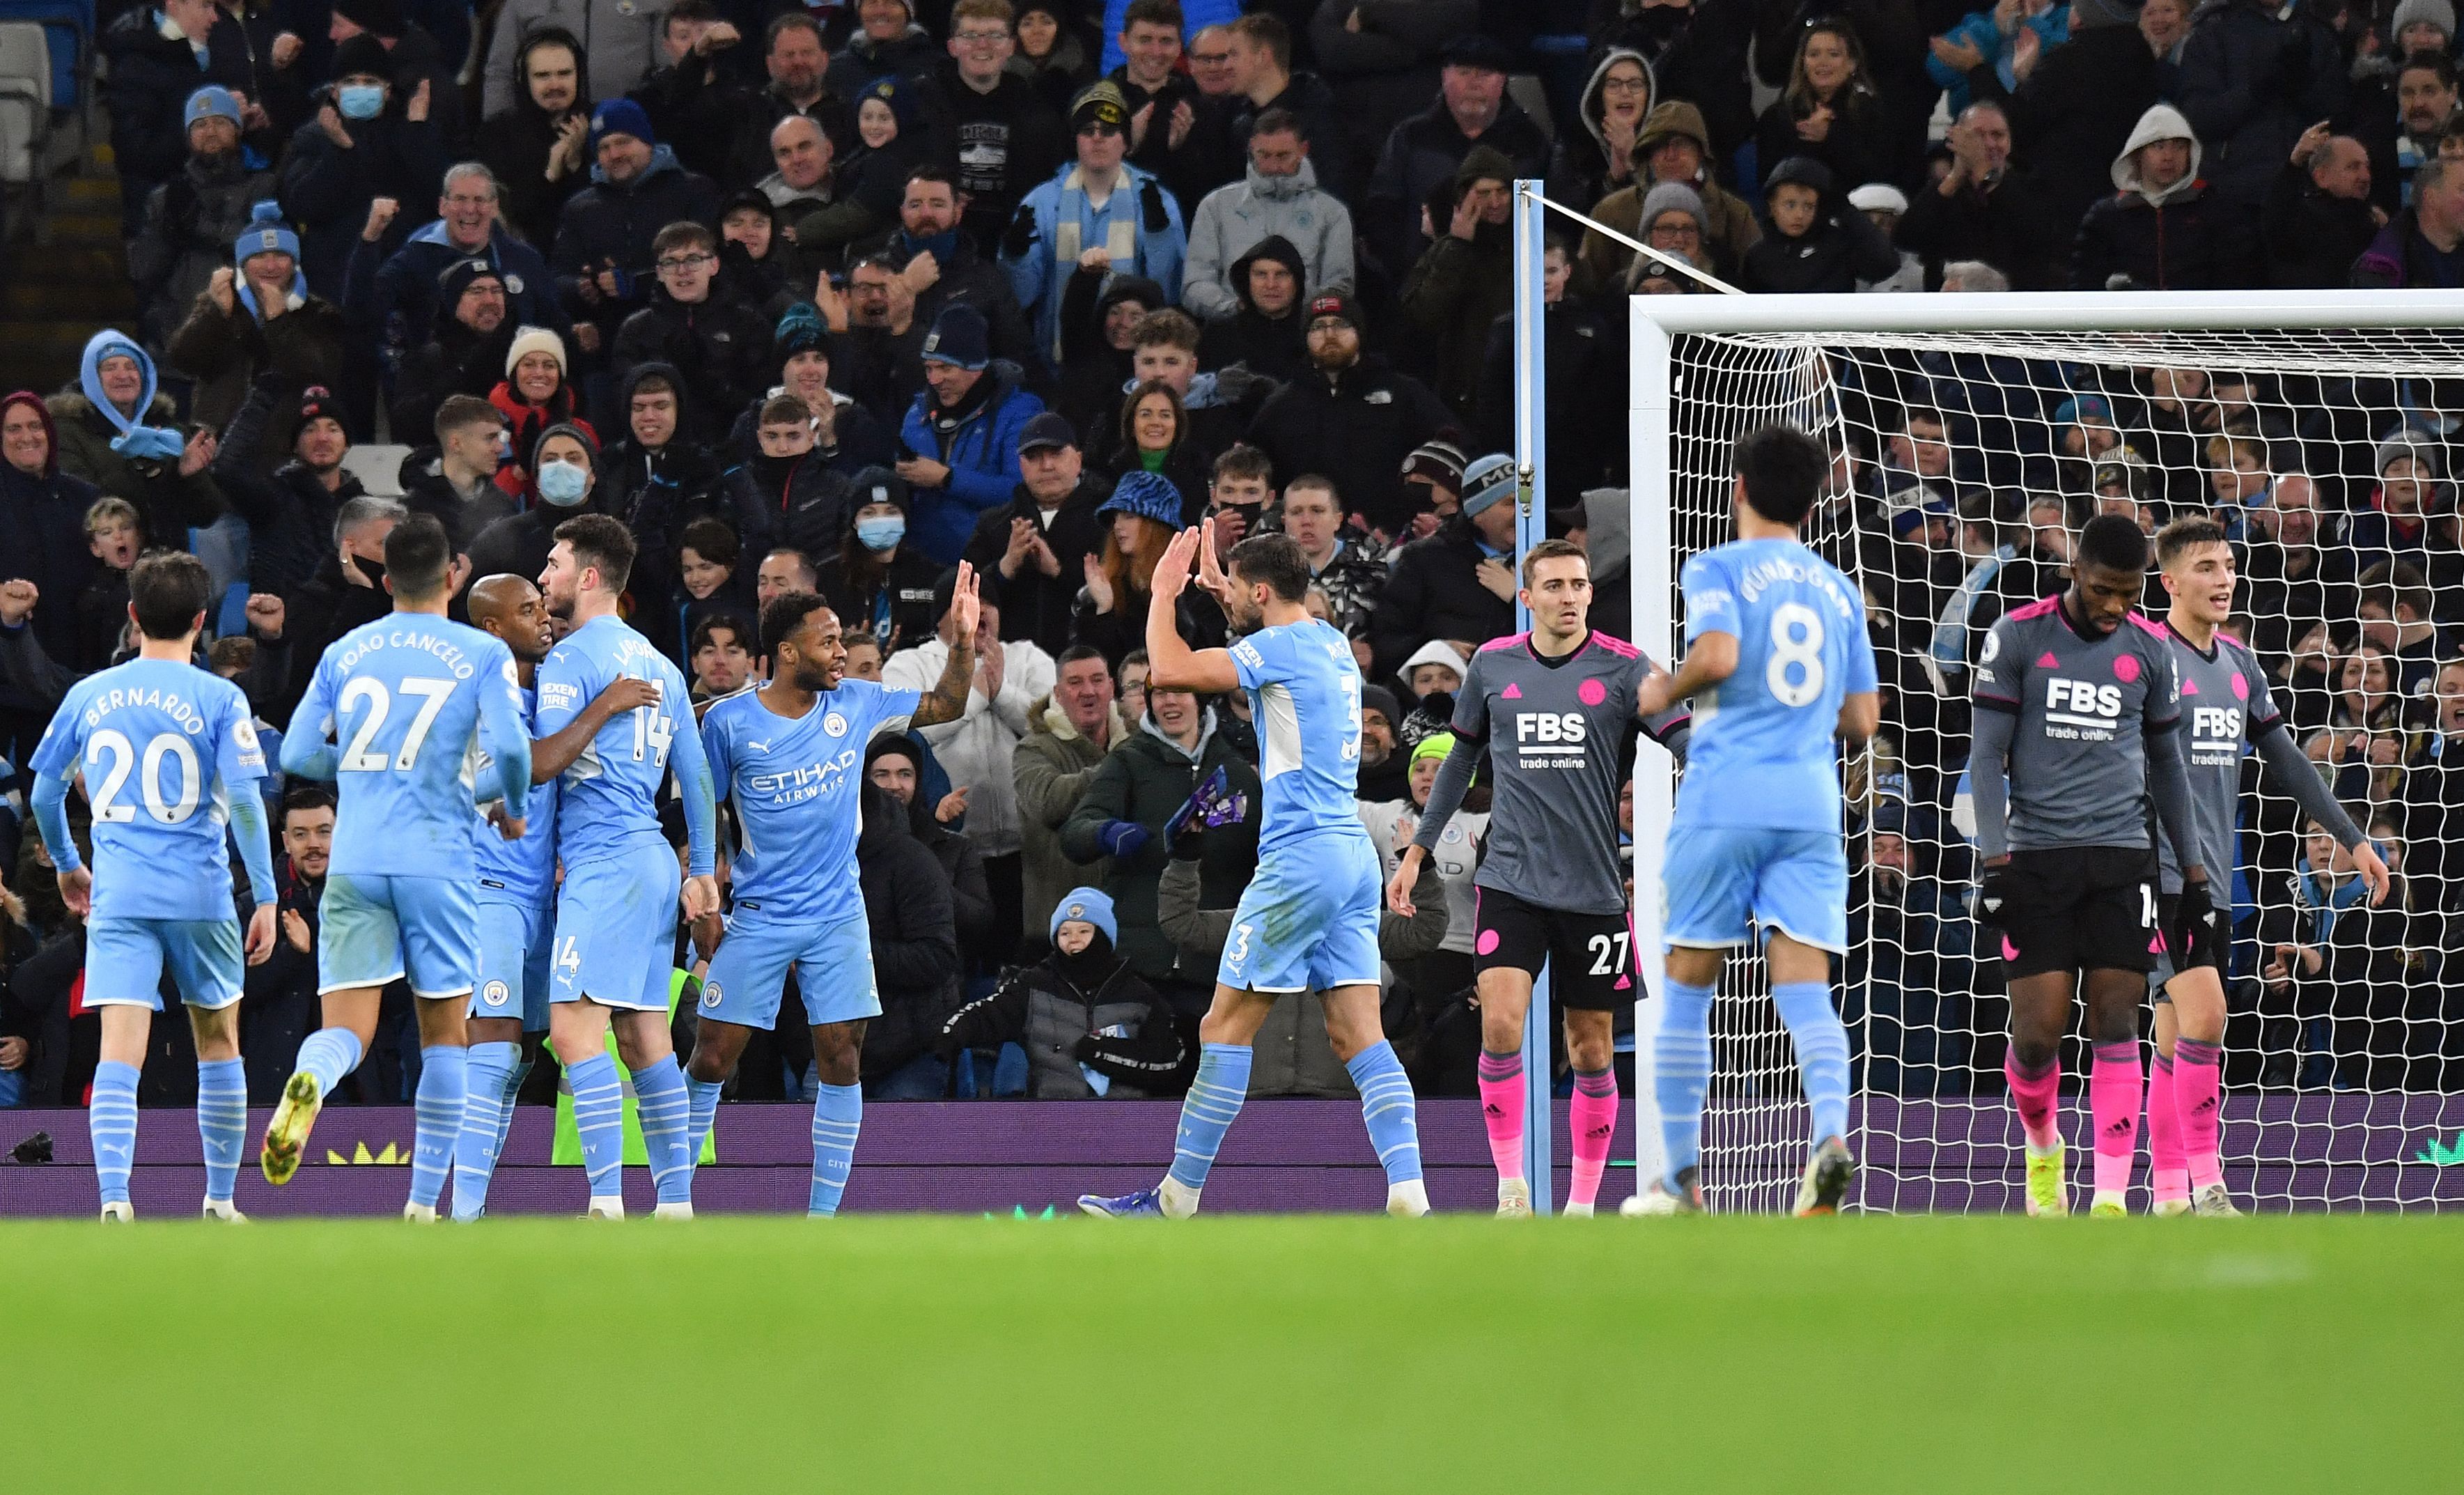 Manchester City players celebrate after scoring a goal against Leicester. Credit: AFP Photo